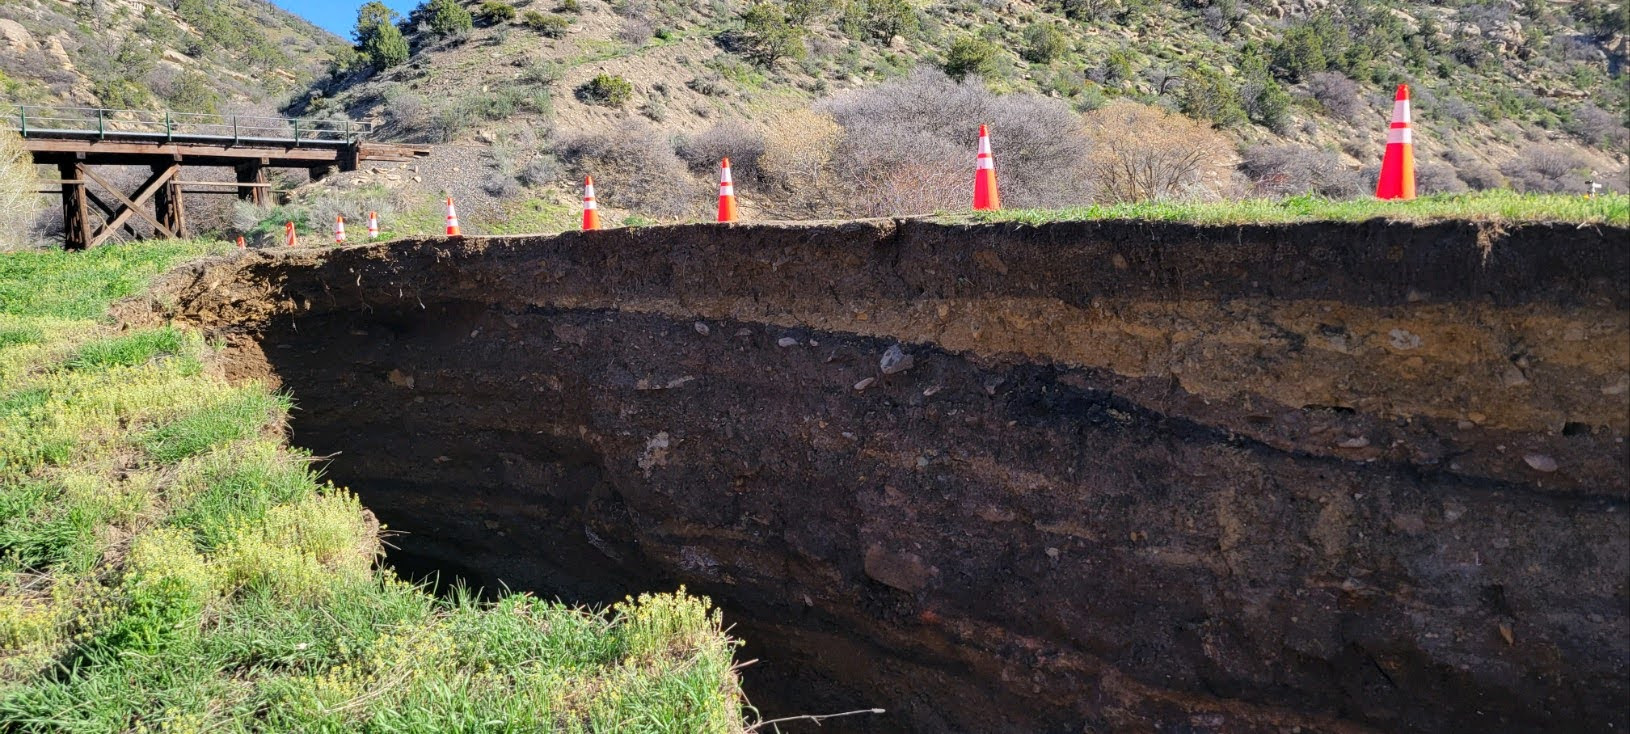 Sinkhole and related damage from the side view on May 3.jpg detail image